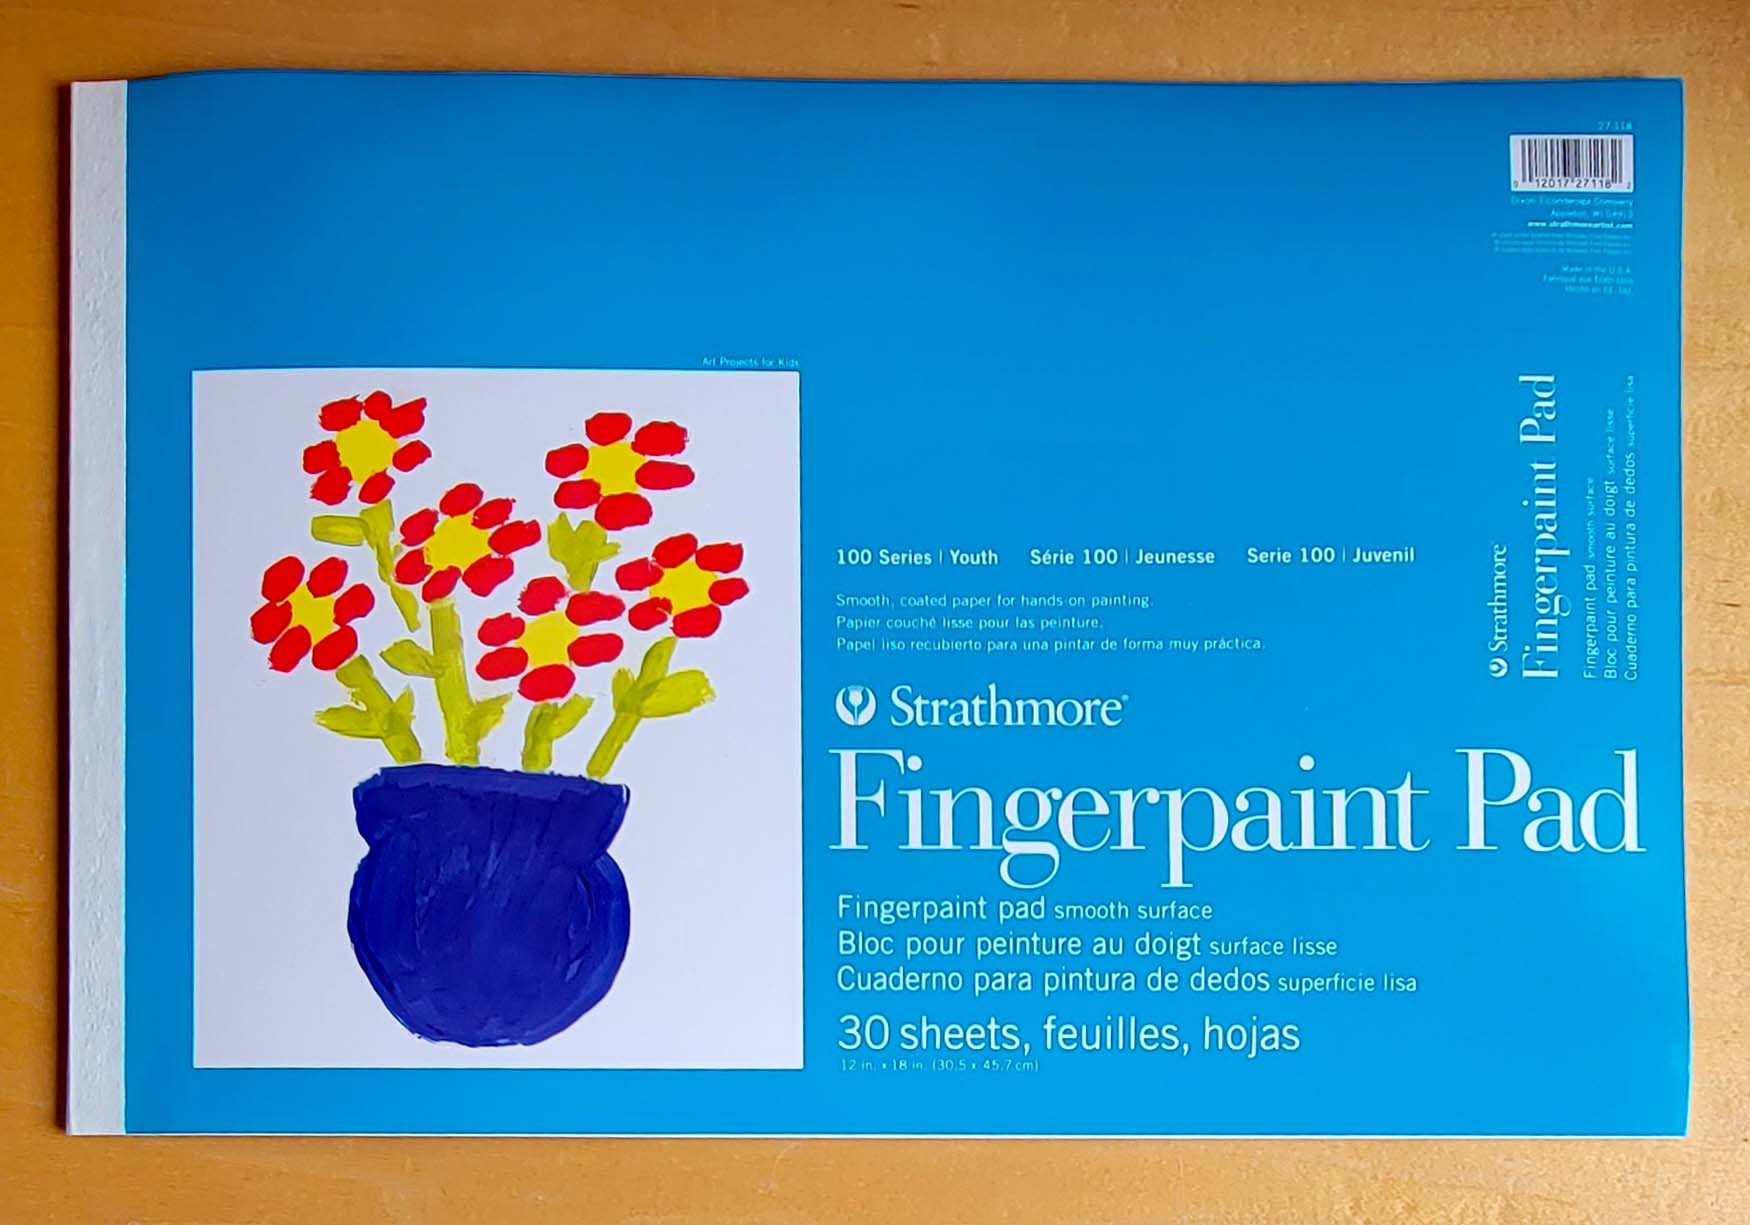 Fingerpaint Pad - Strathmore. Smooth, coated paper for hands-on learning! Fingerpaint Pad - Strathmore • PAPER SCISSORS STONE